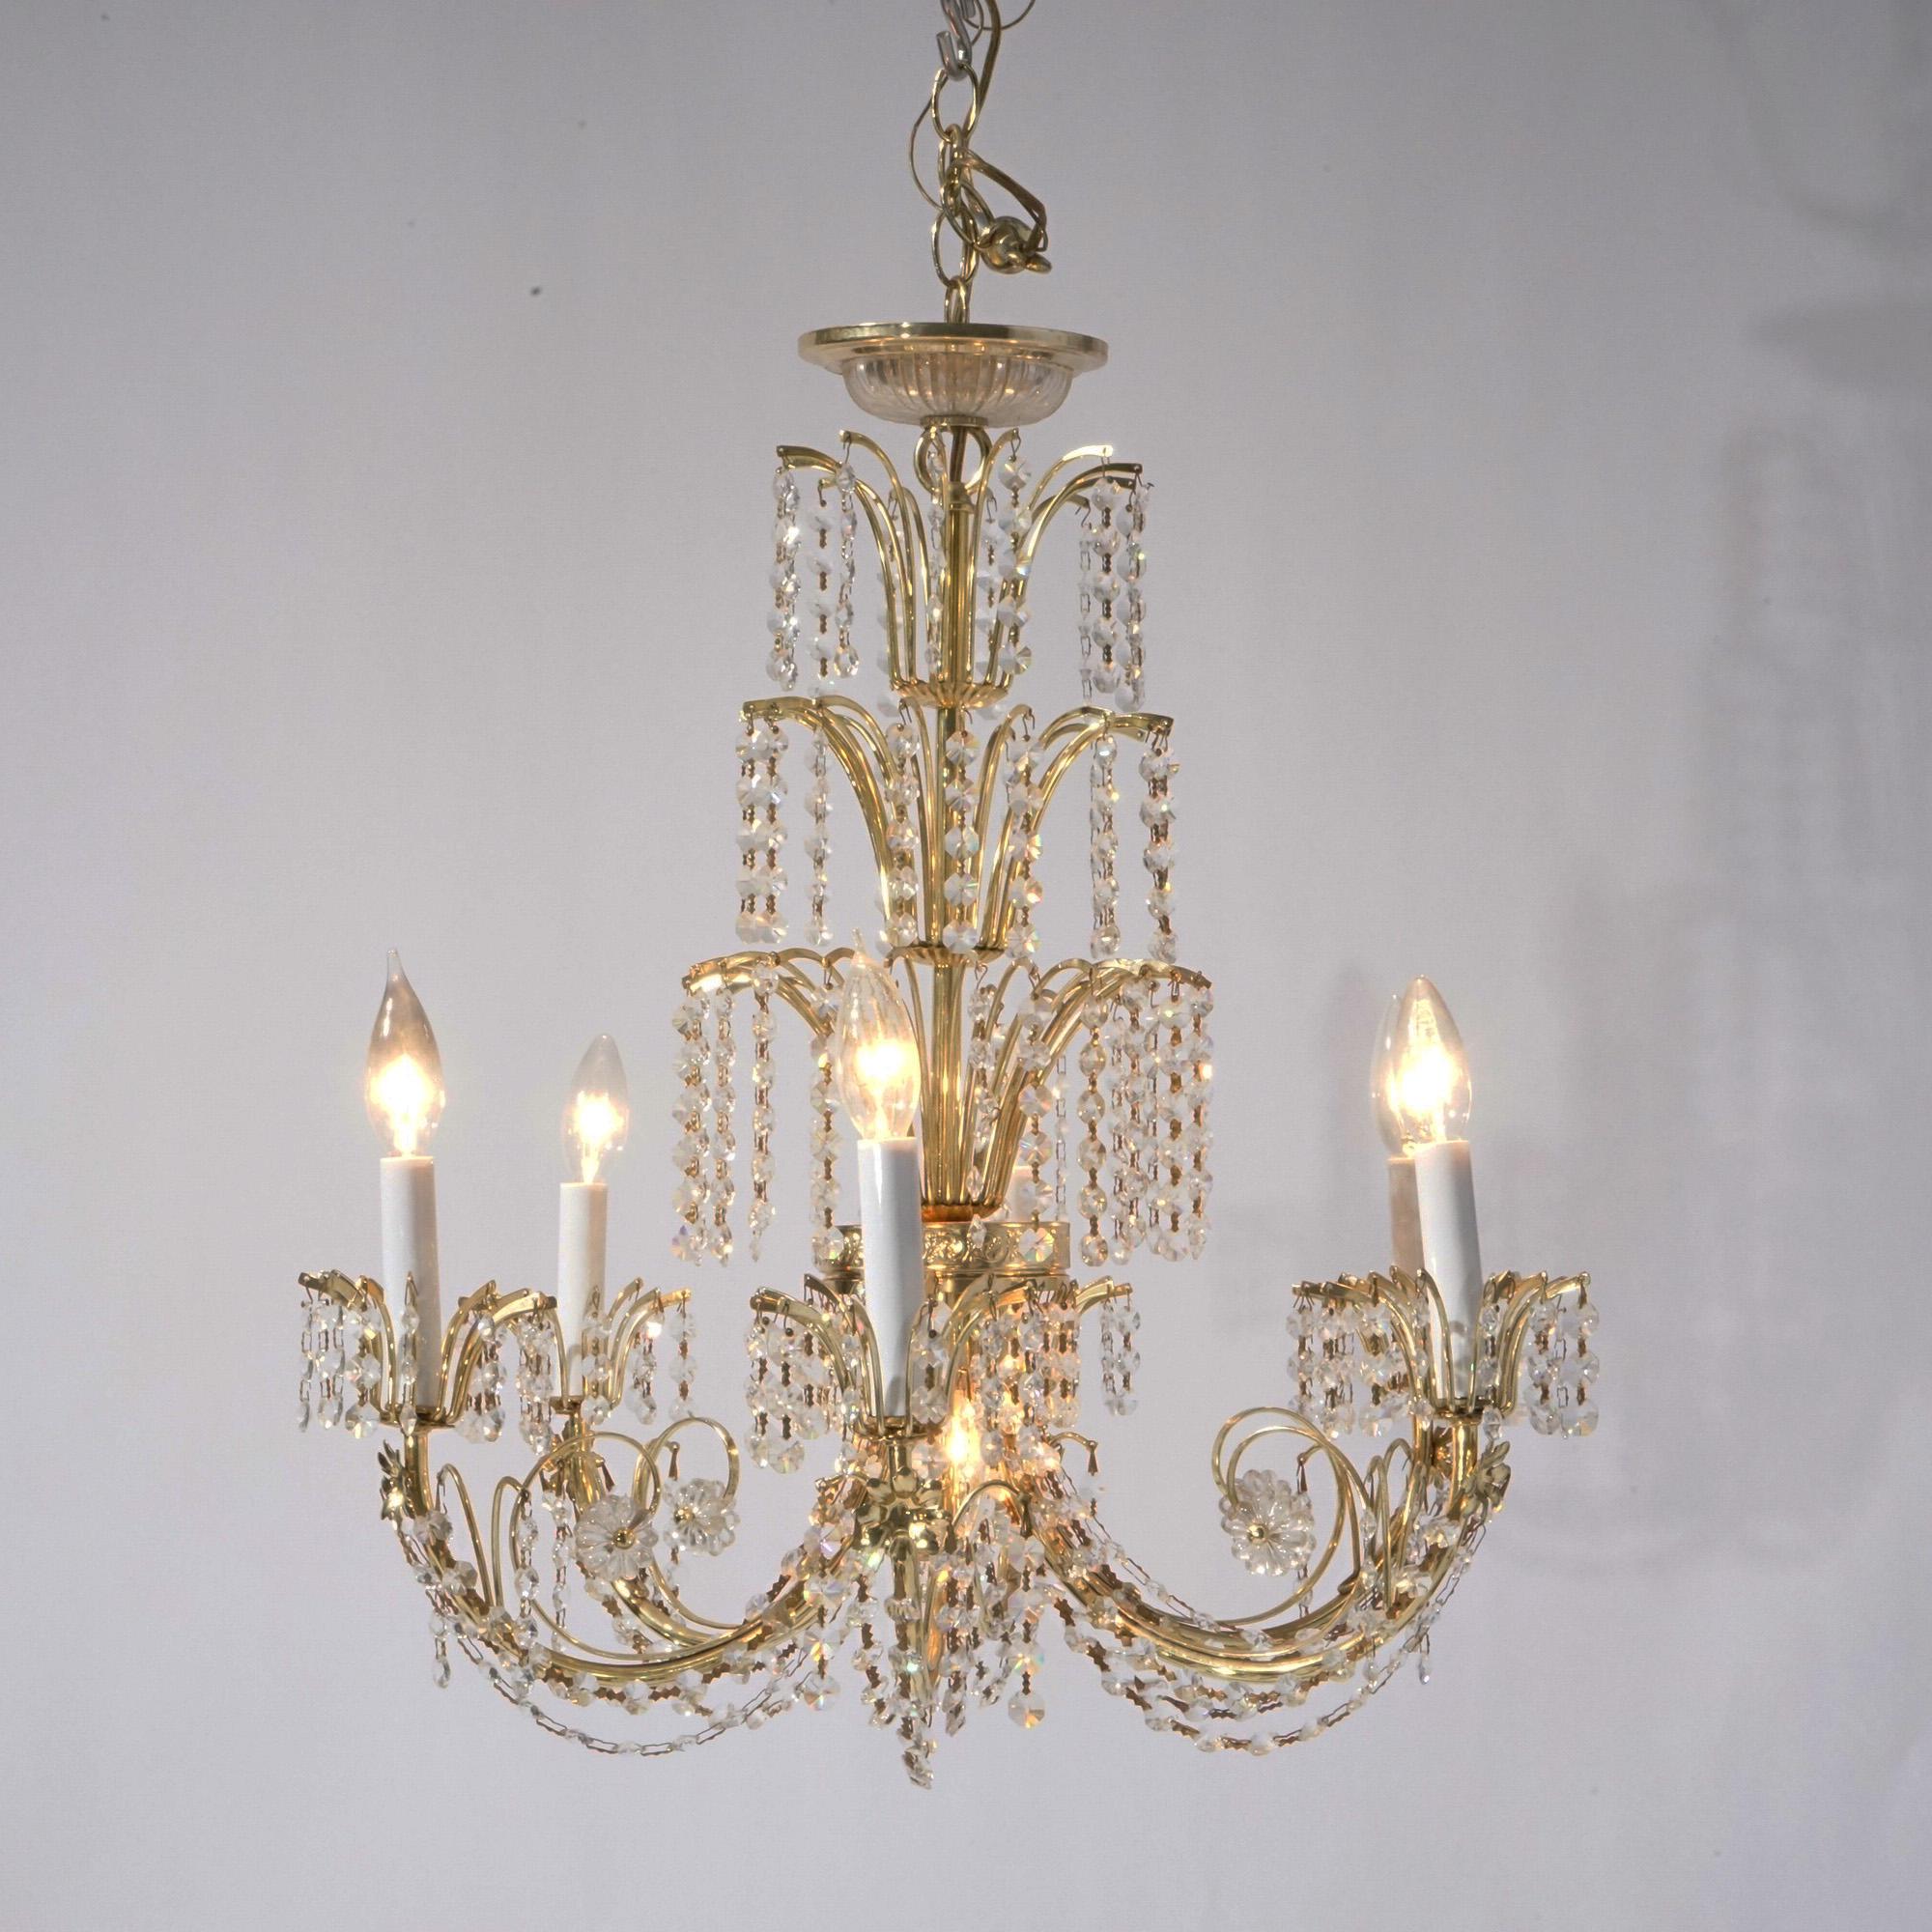 French Style Brass & Crystal Tiered Prism Chandelier 20th C For Sale 3